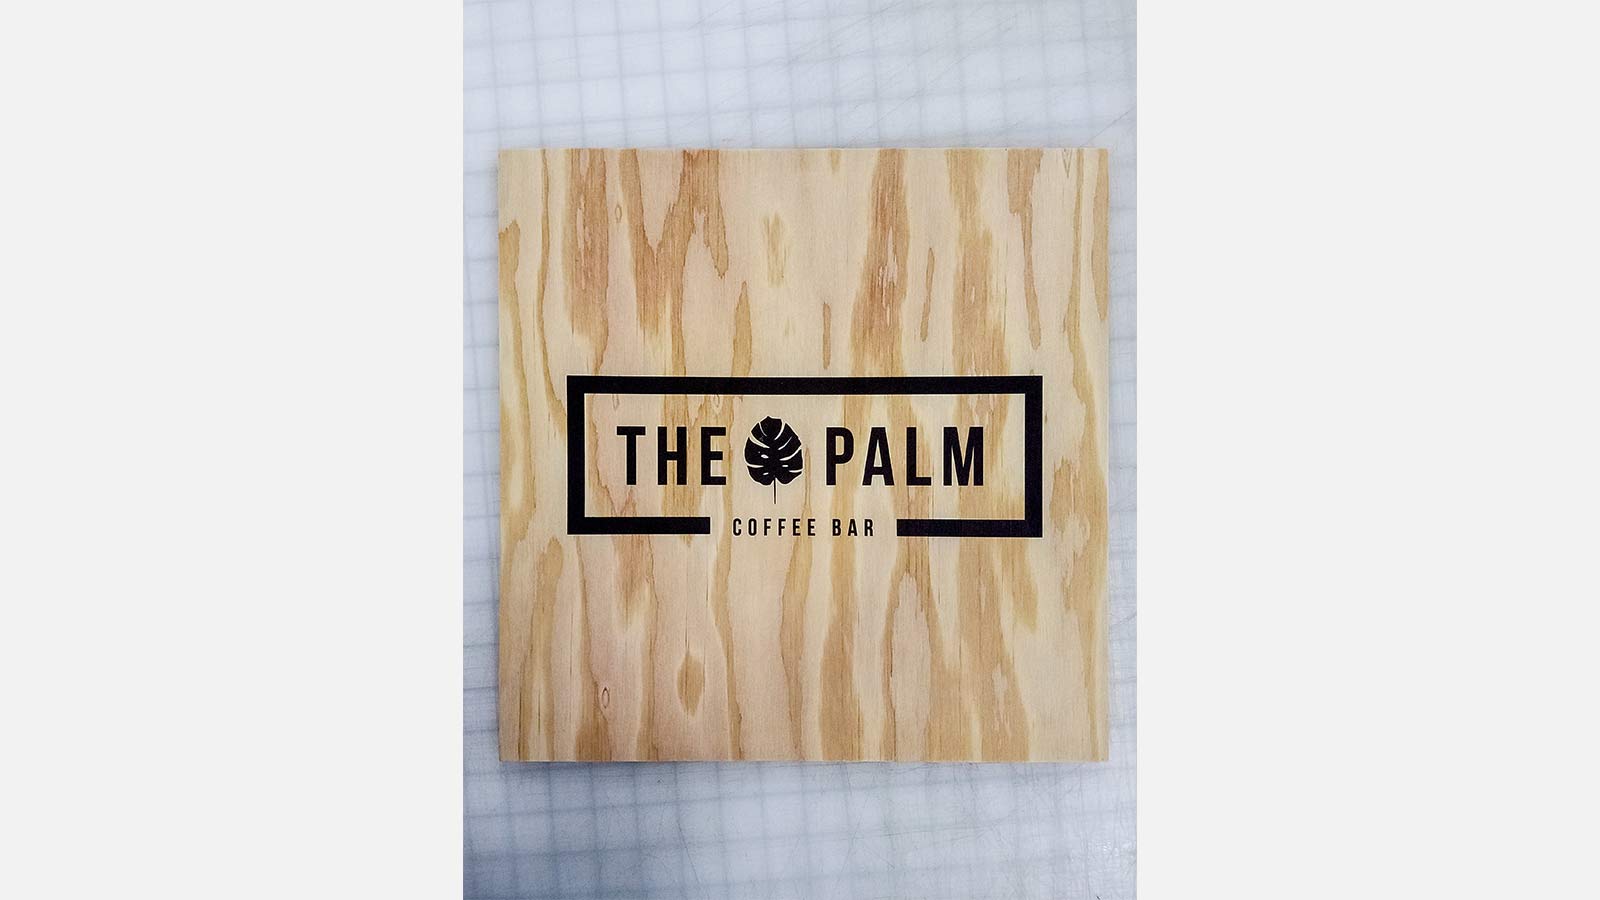 Printed wooden signage for The Palm coffee bar